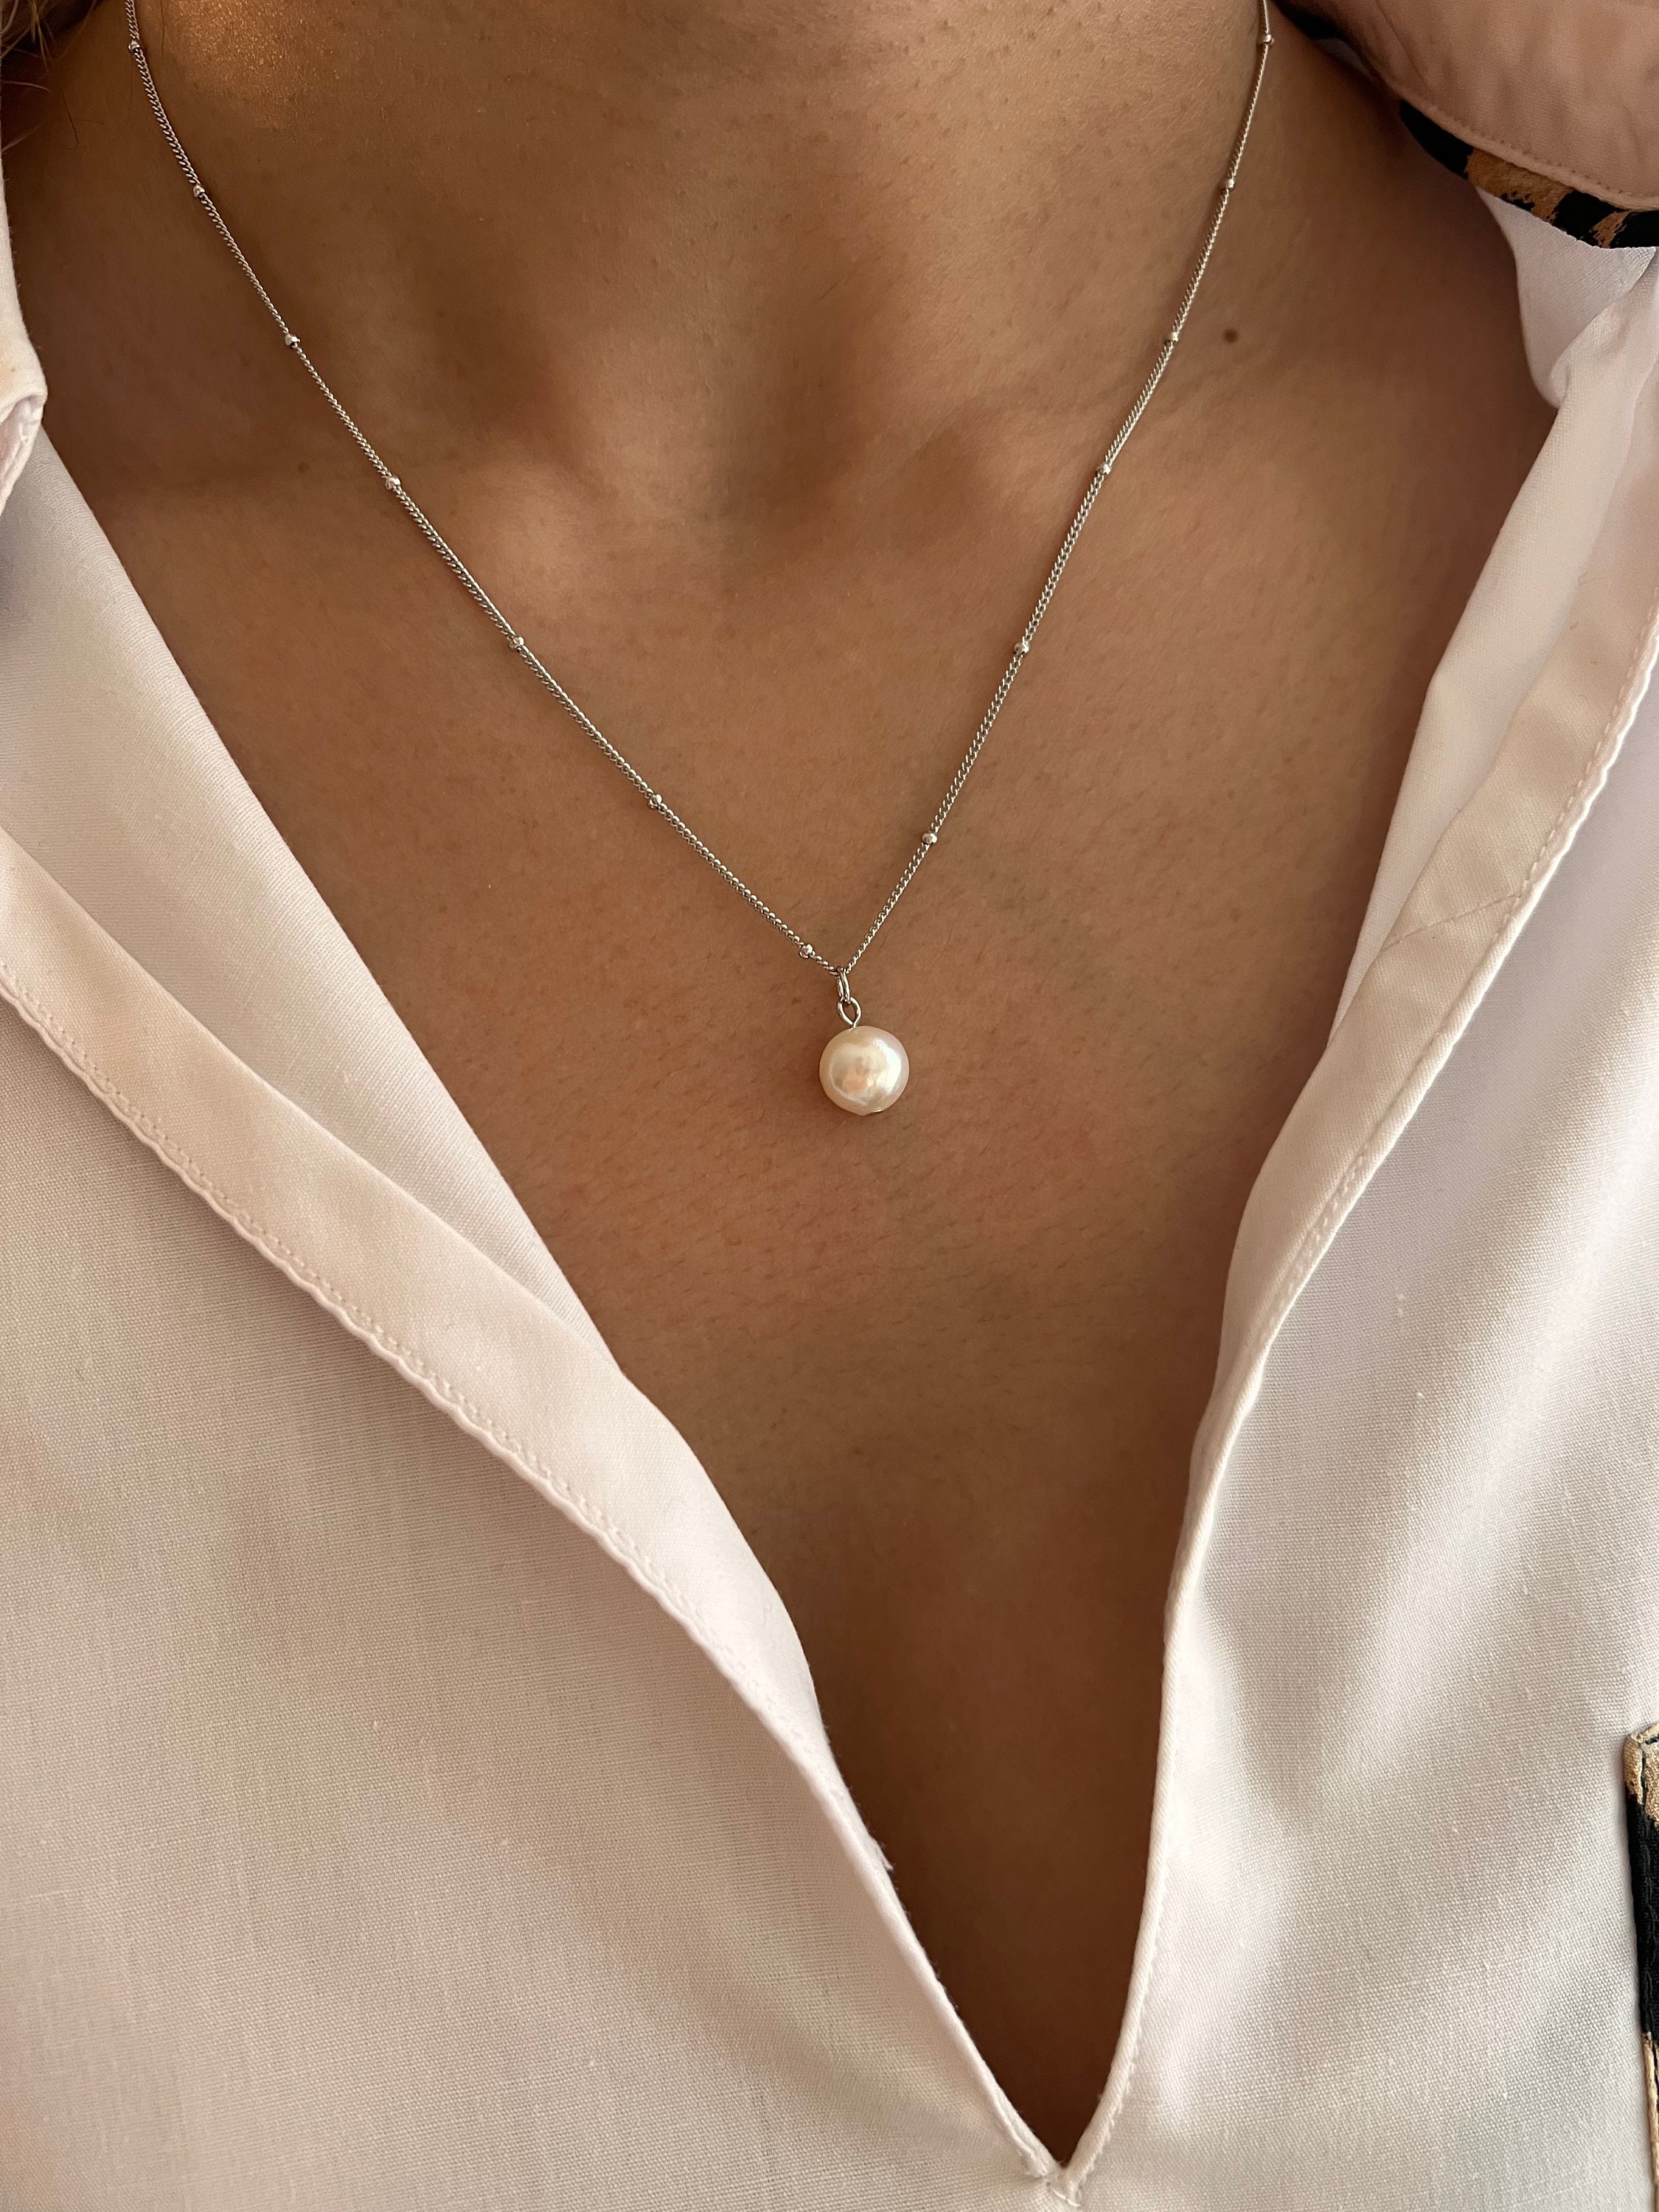 Pearl / Silver Silver Gold Plated Gold Pearl Etsy 925/ Baroque Necklace Chain Ball / Necklace Carat Pearl Necklace Finland Sterling With / Pearls 18 Freshwater -